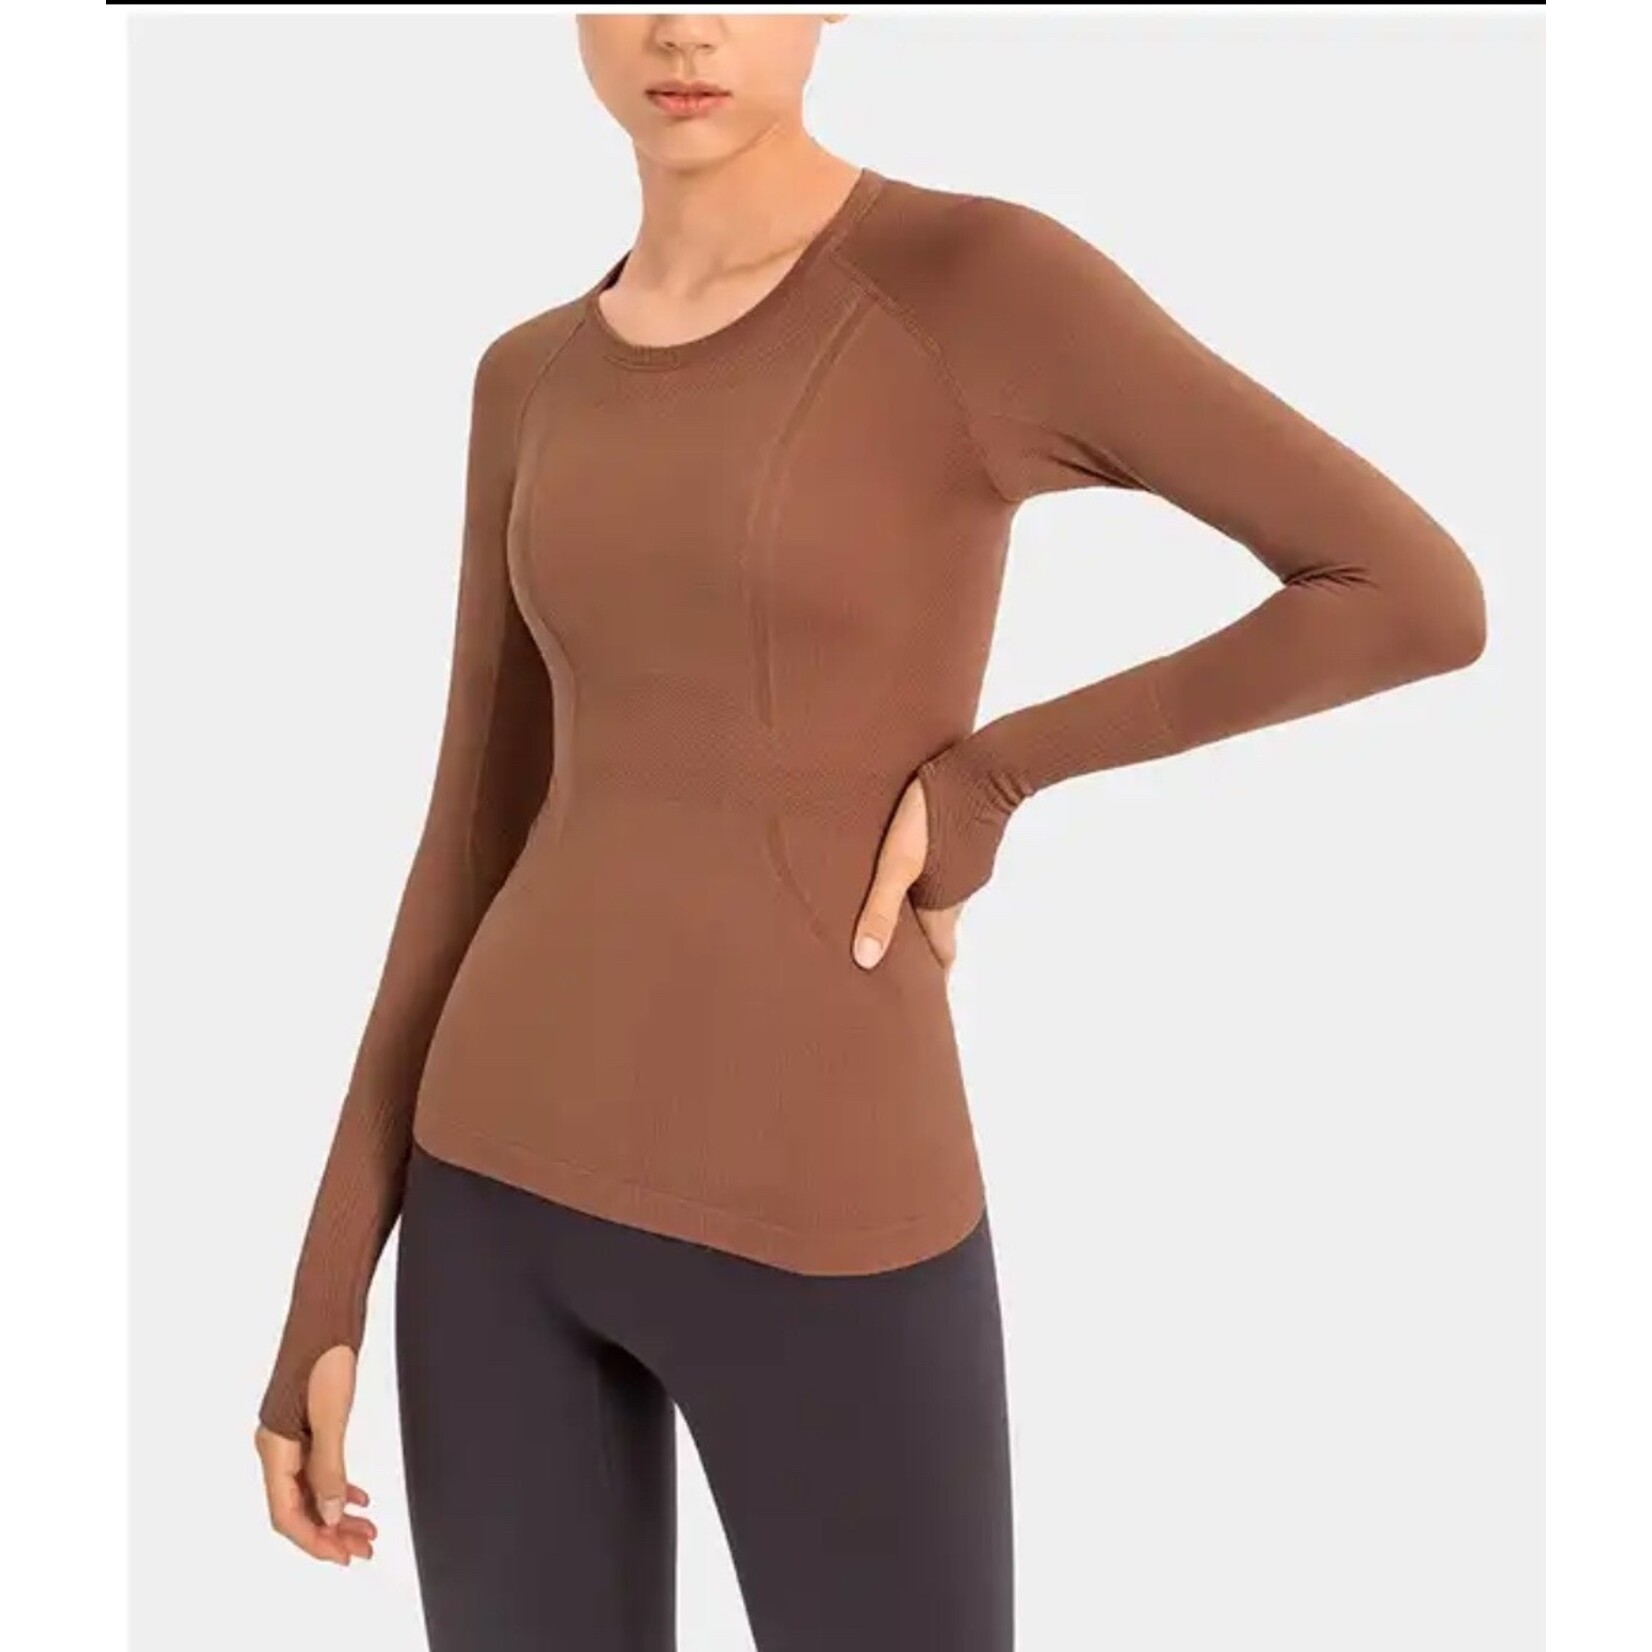 Timeless Essential Seamless Long Sleeve Athletic Top